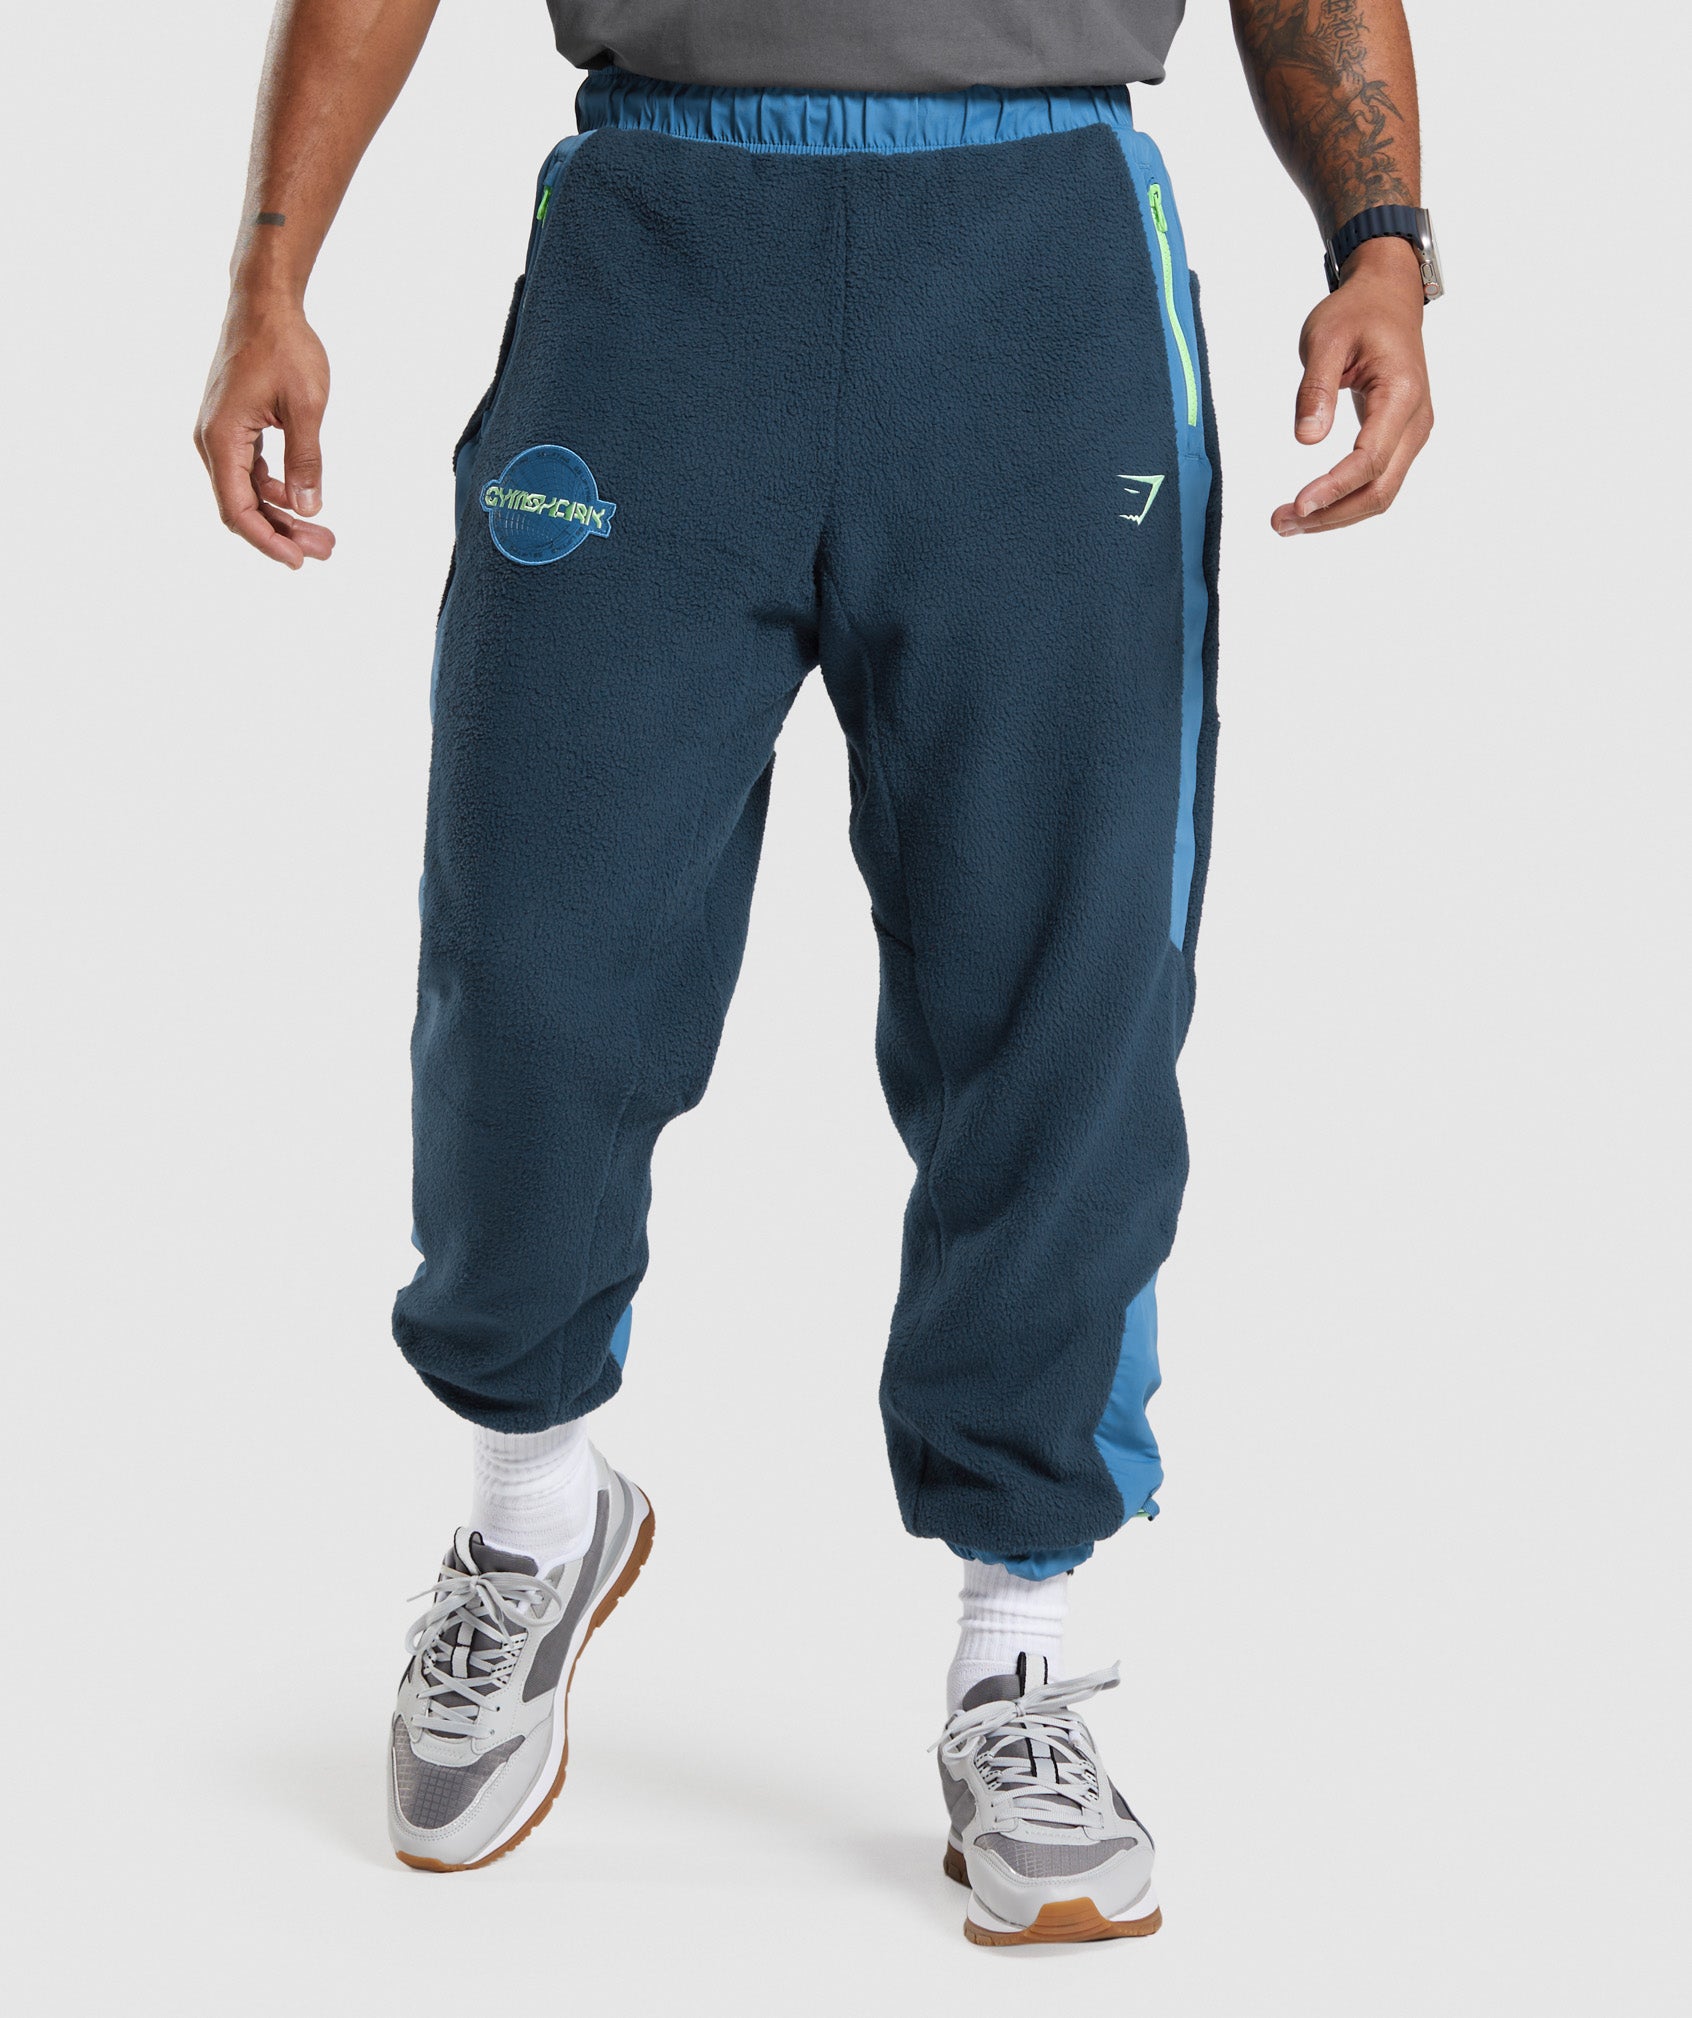 Vibes Joggers in Navy/Lakeside Blue - view 1